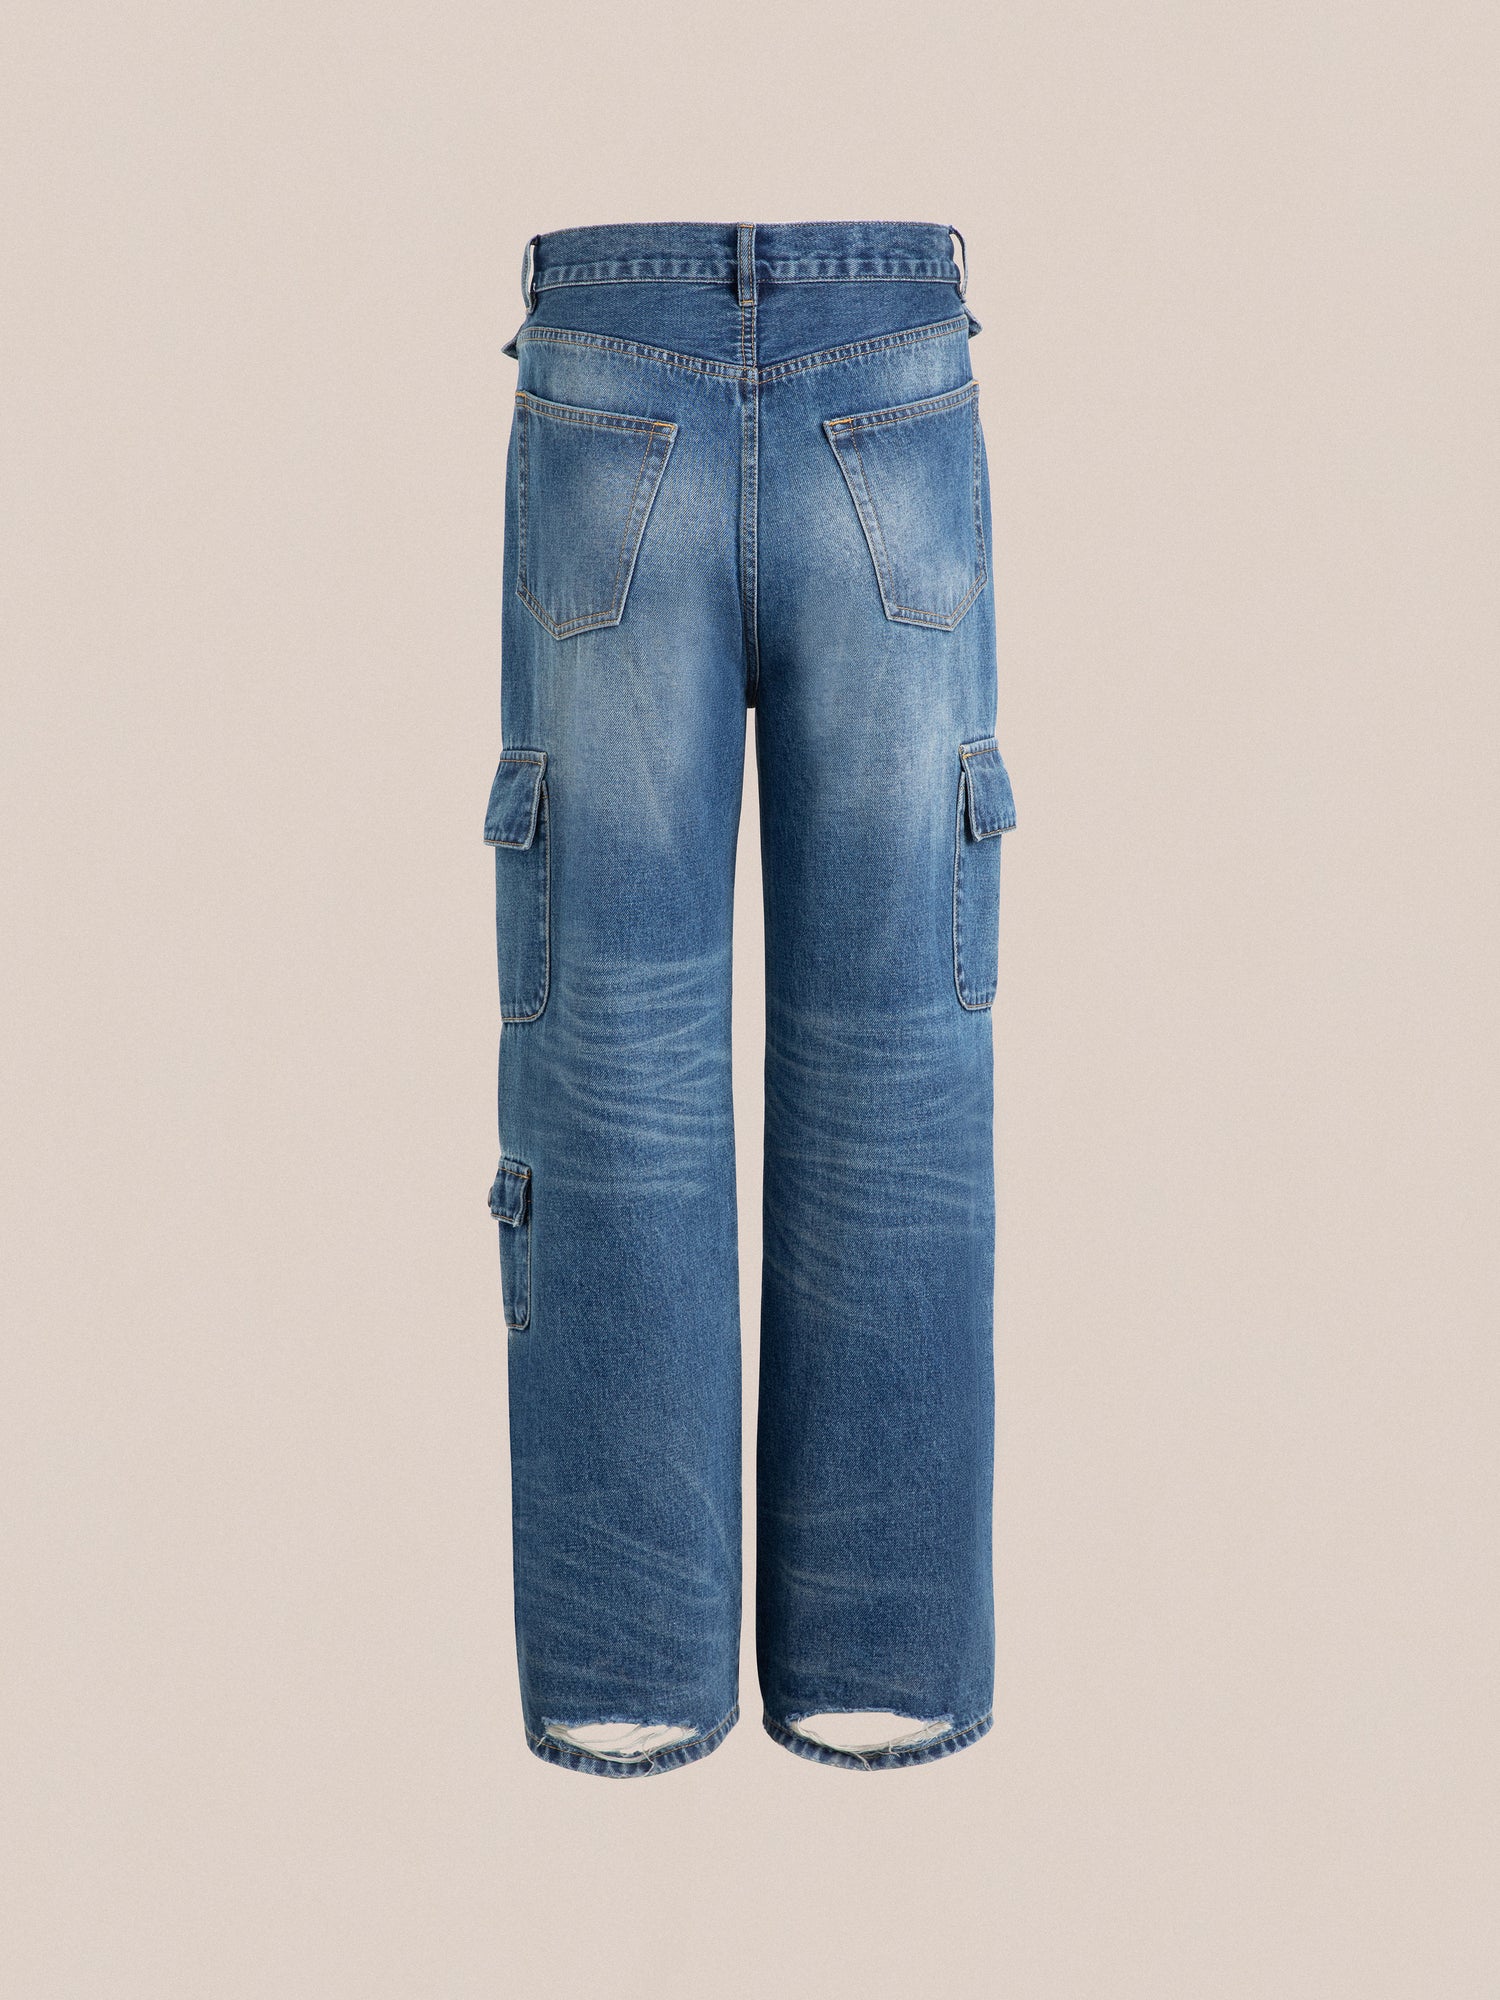 Siwa Cargo Paneled Jeans from Found, with side pockets and distressed hems, displayed against a neutral background.